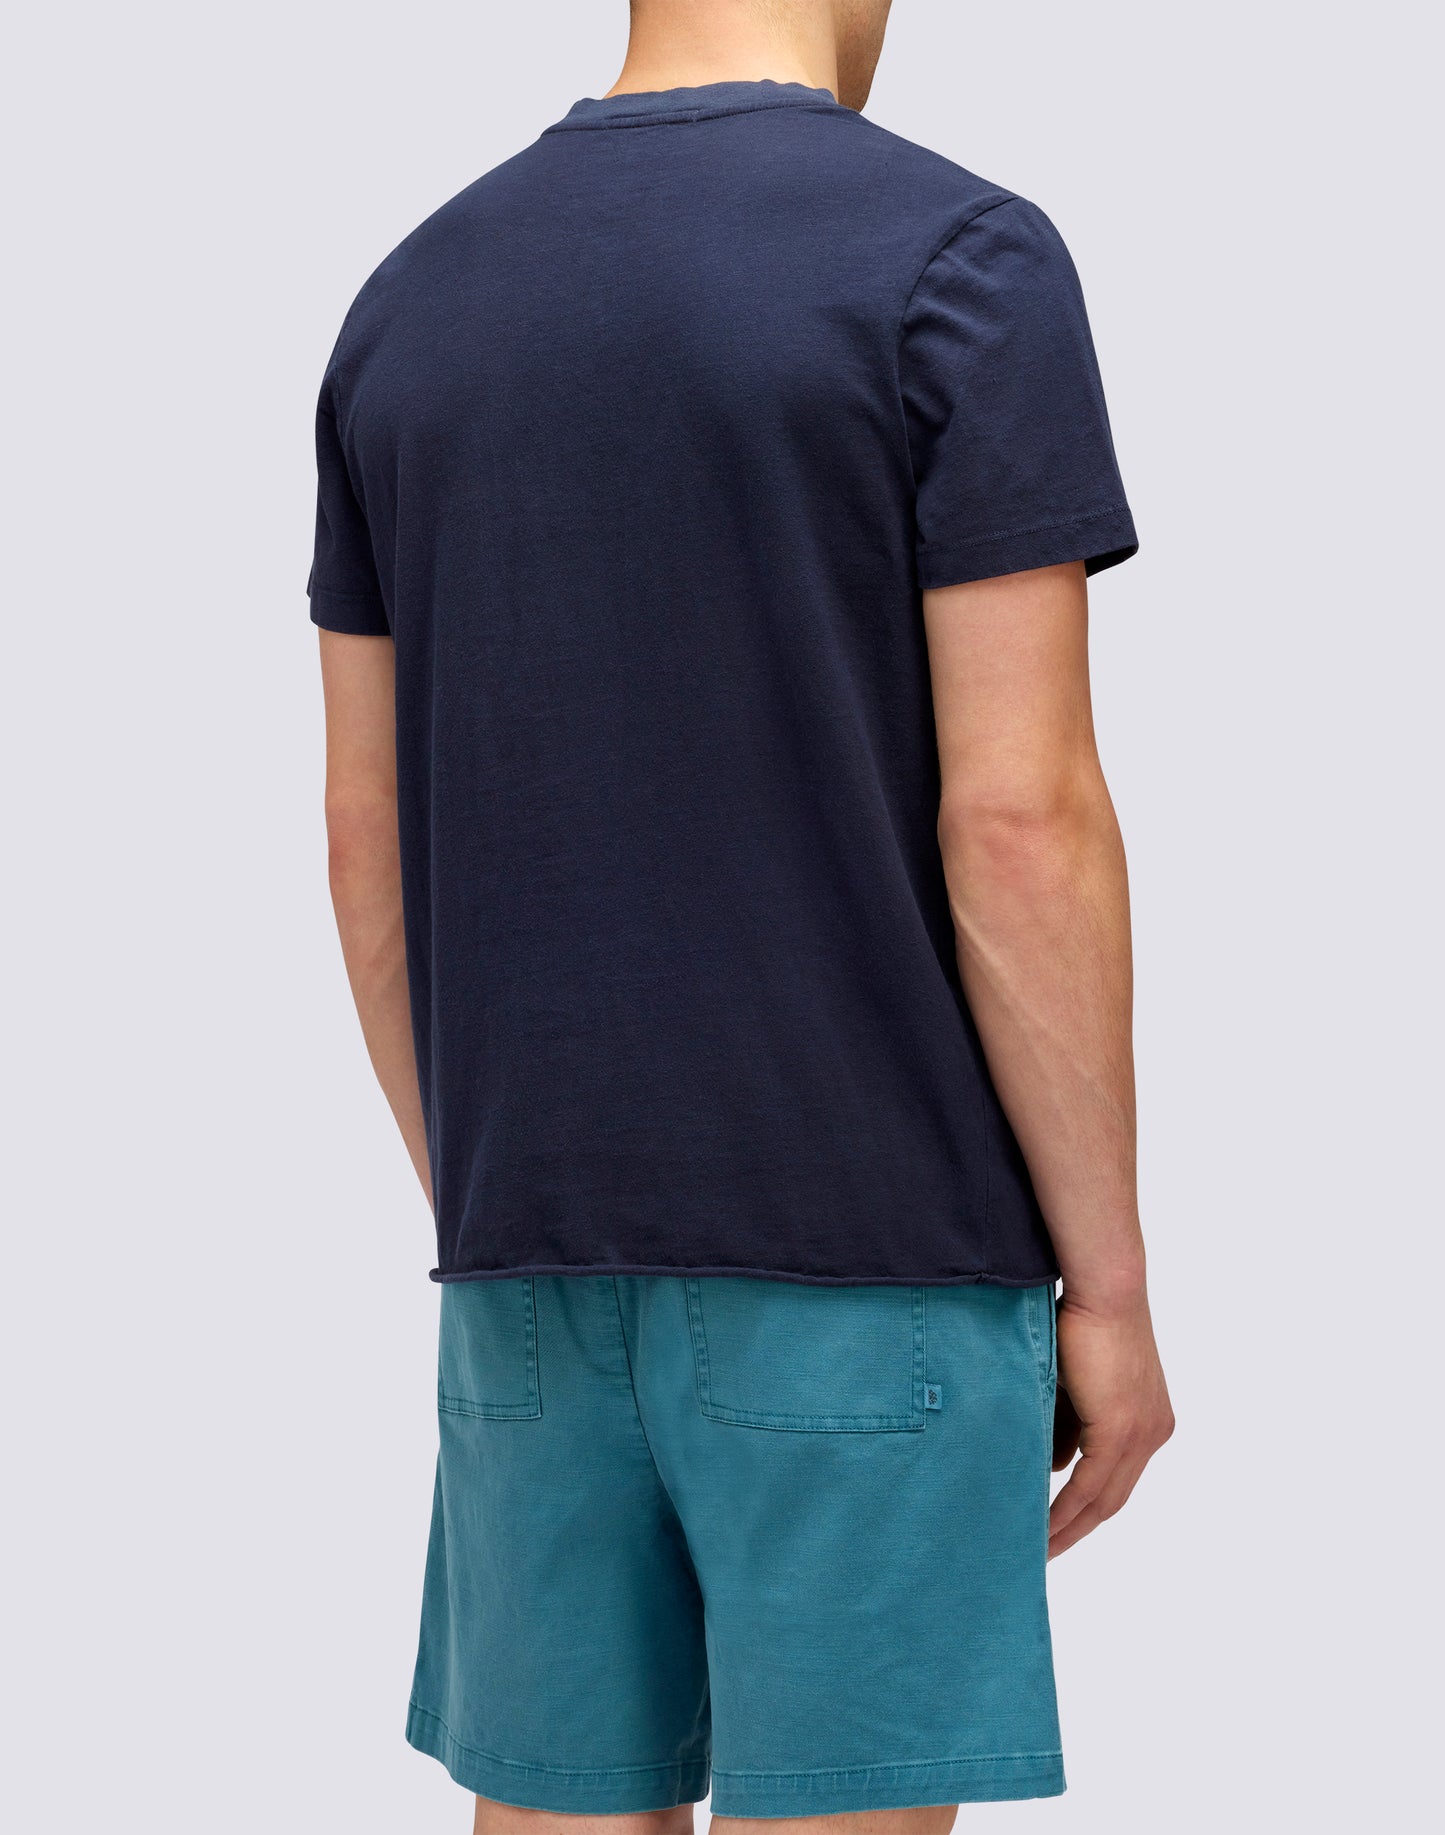 T-SHIRT WITH BUTTONS